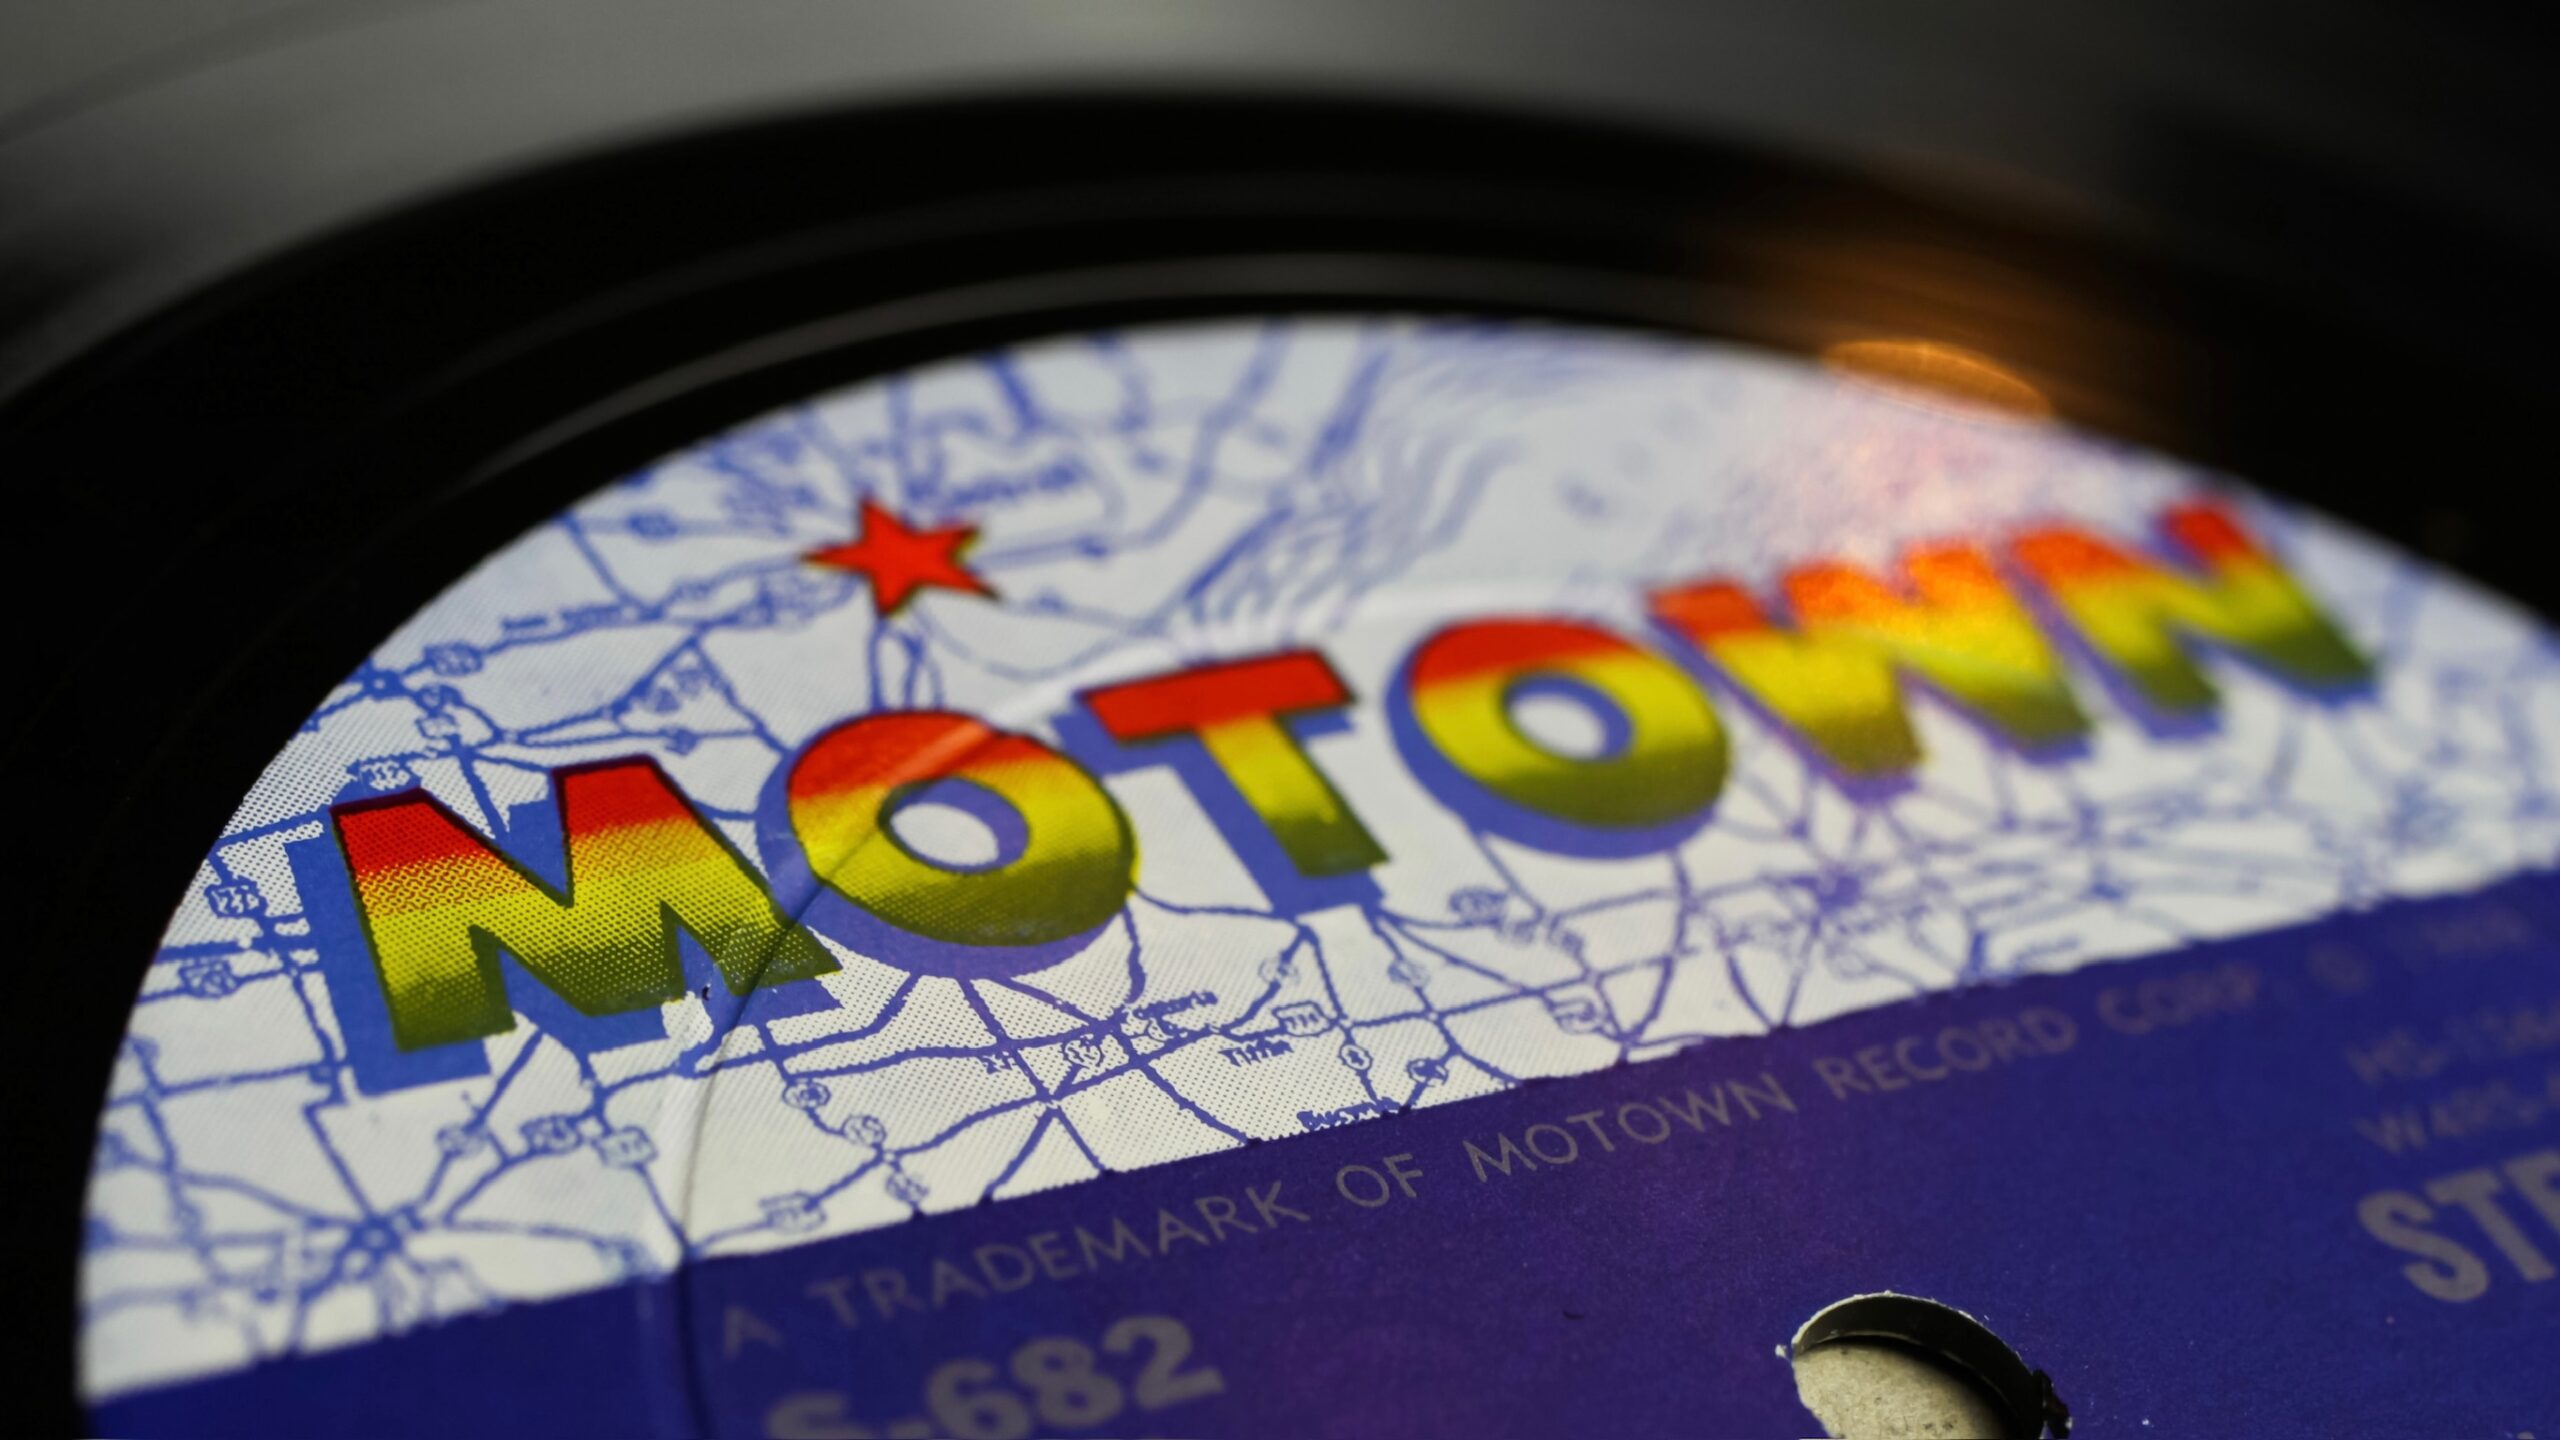 Viersen, Germany - May 9. 2020: Close up of isolated vinyl record album  with logo lettering from Tamla Motwon soul music label (selective focus on letter M left)